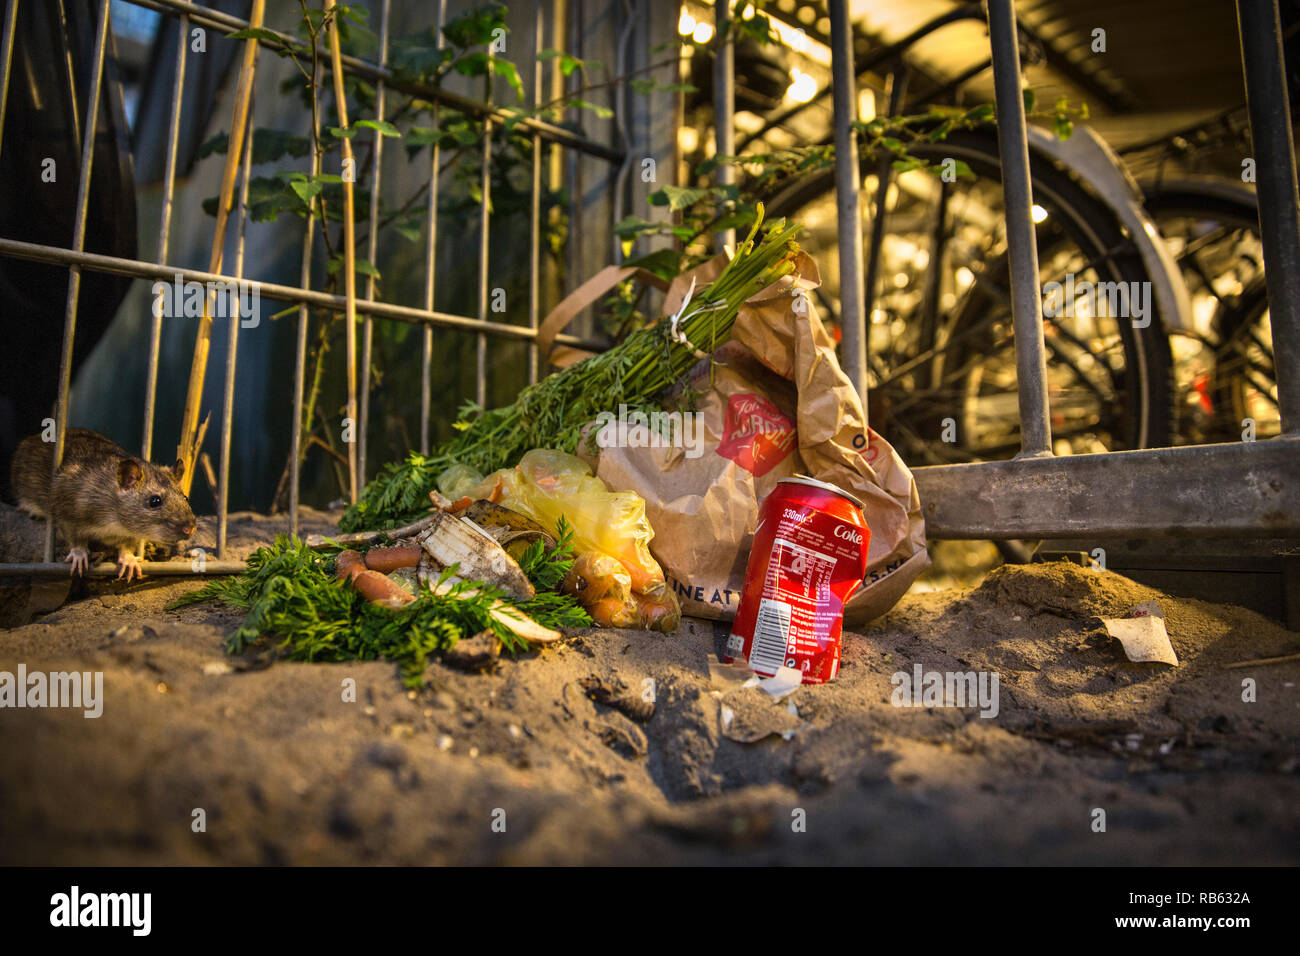 Brown rat (Rattus Norvegicus) eating from garbage near waste containers and bicycle storage, Amsterdam, The Netherlands. Stock Photo